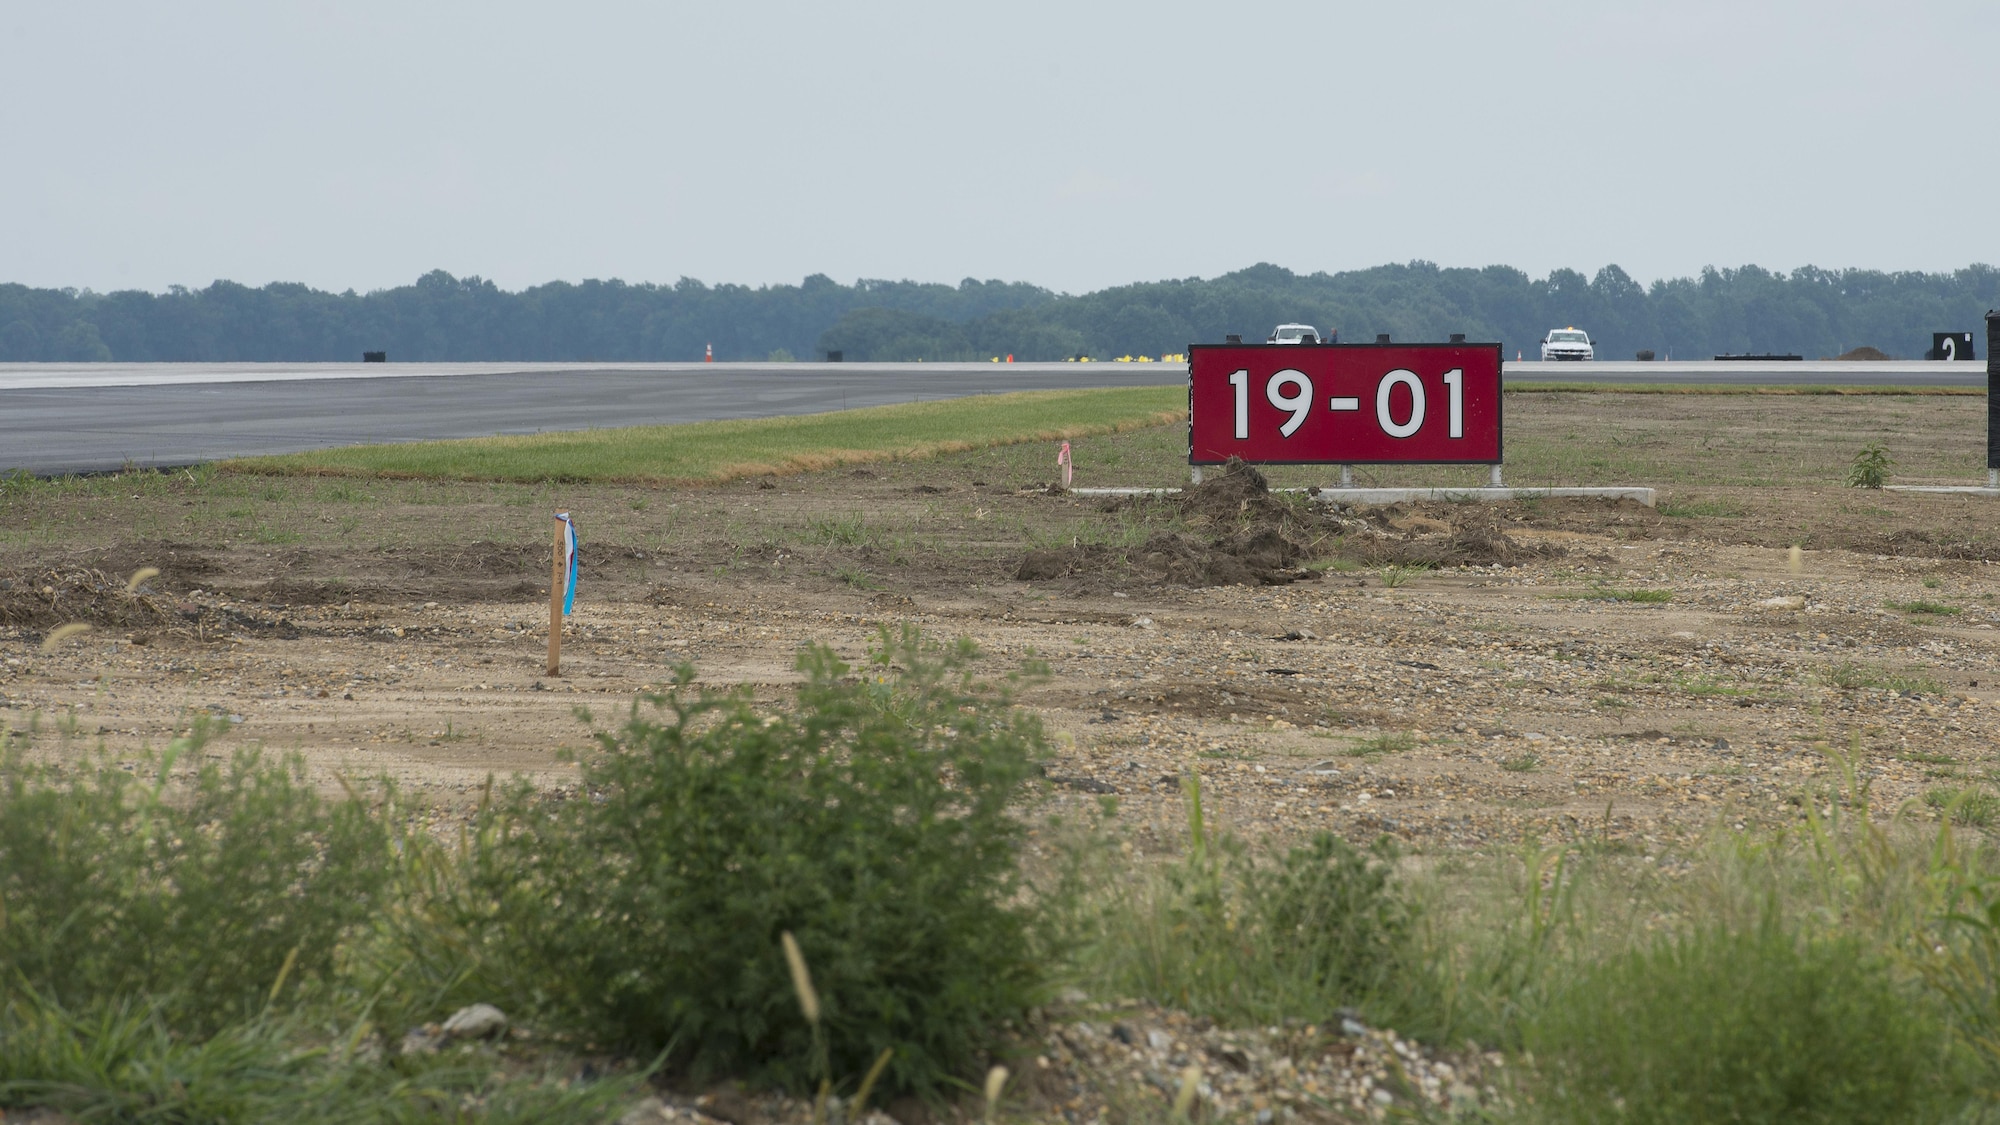 An airfield sign marking Runway 01-19 sits at its intersection with Runway 14-32 Sept. 1, 2016, on Dover Air Force Base, Del. Runway 01-19 is expected to open for operation Sept. 23, 2016. (U.S. Air Force photo by Senior Airman Zachary Cacicia)